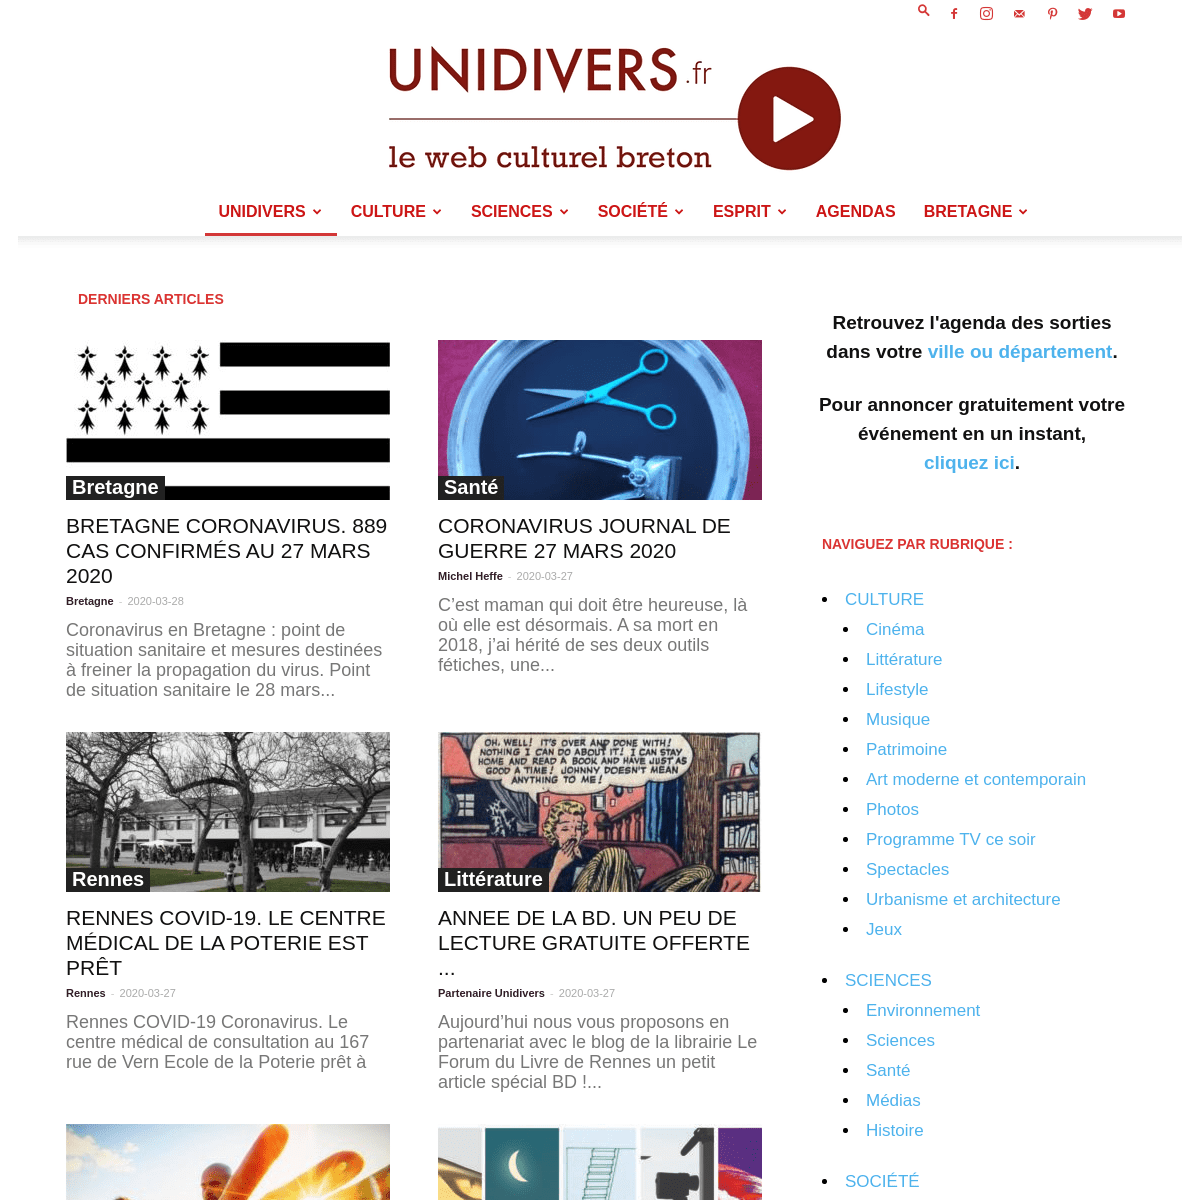 A complete backup of unidivers.fr